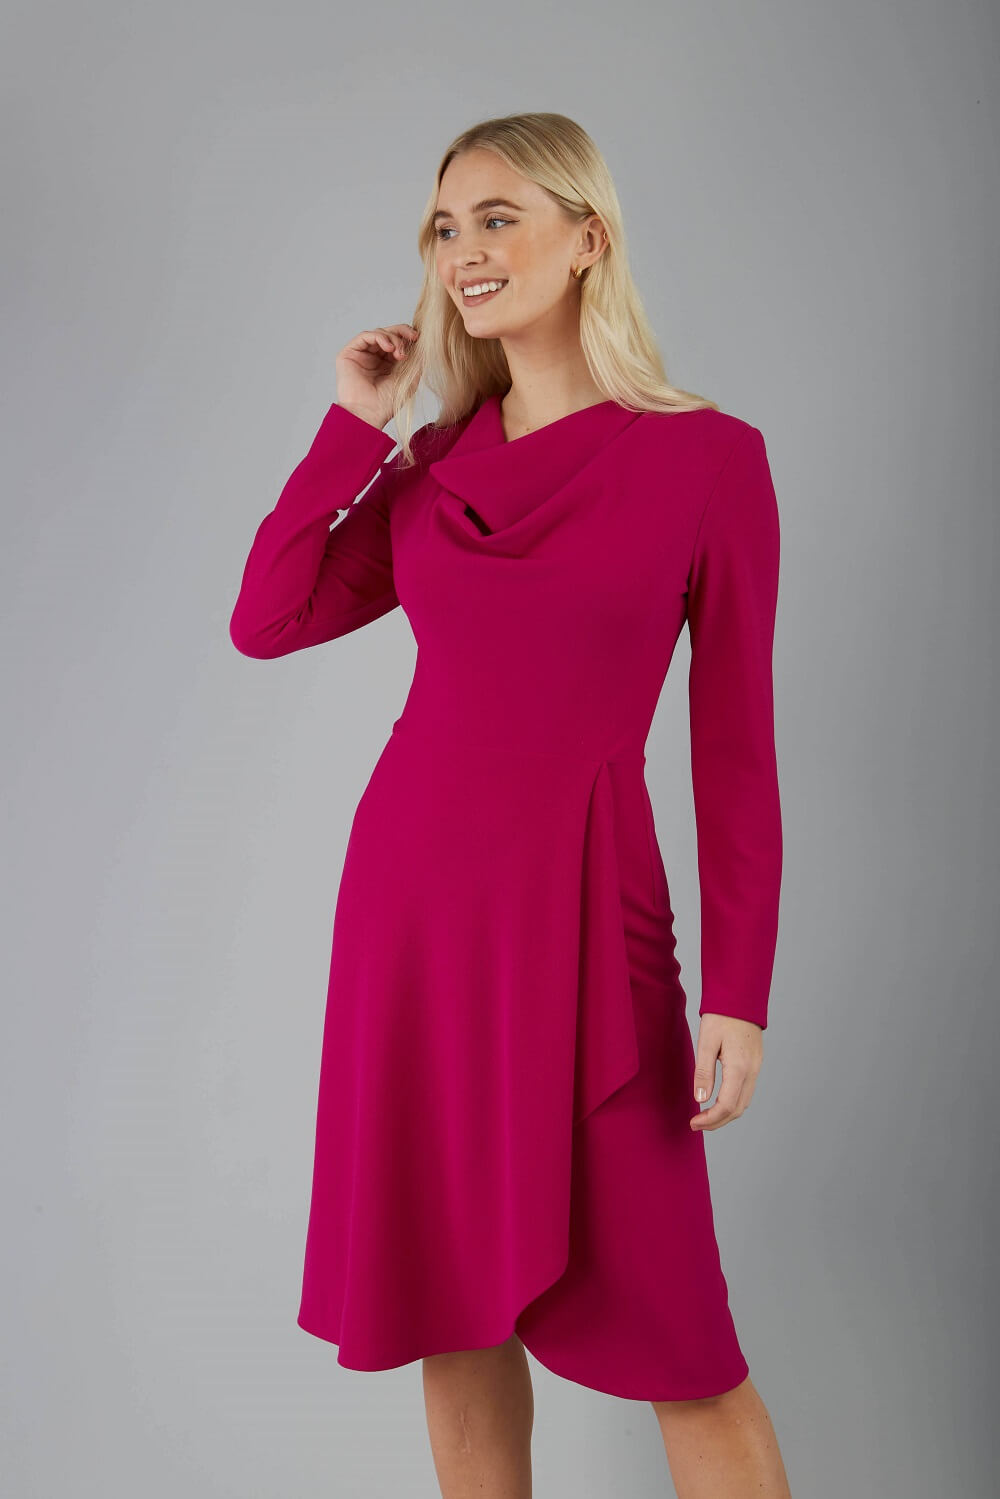 blonde model is wearing diva catwalk moraig swing long sleeve dress with high cowl neckline and wrap skirt in magenta front